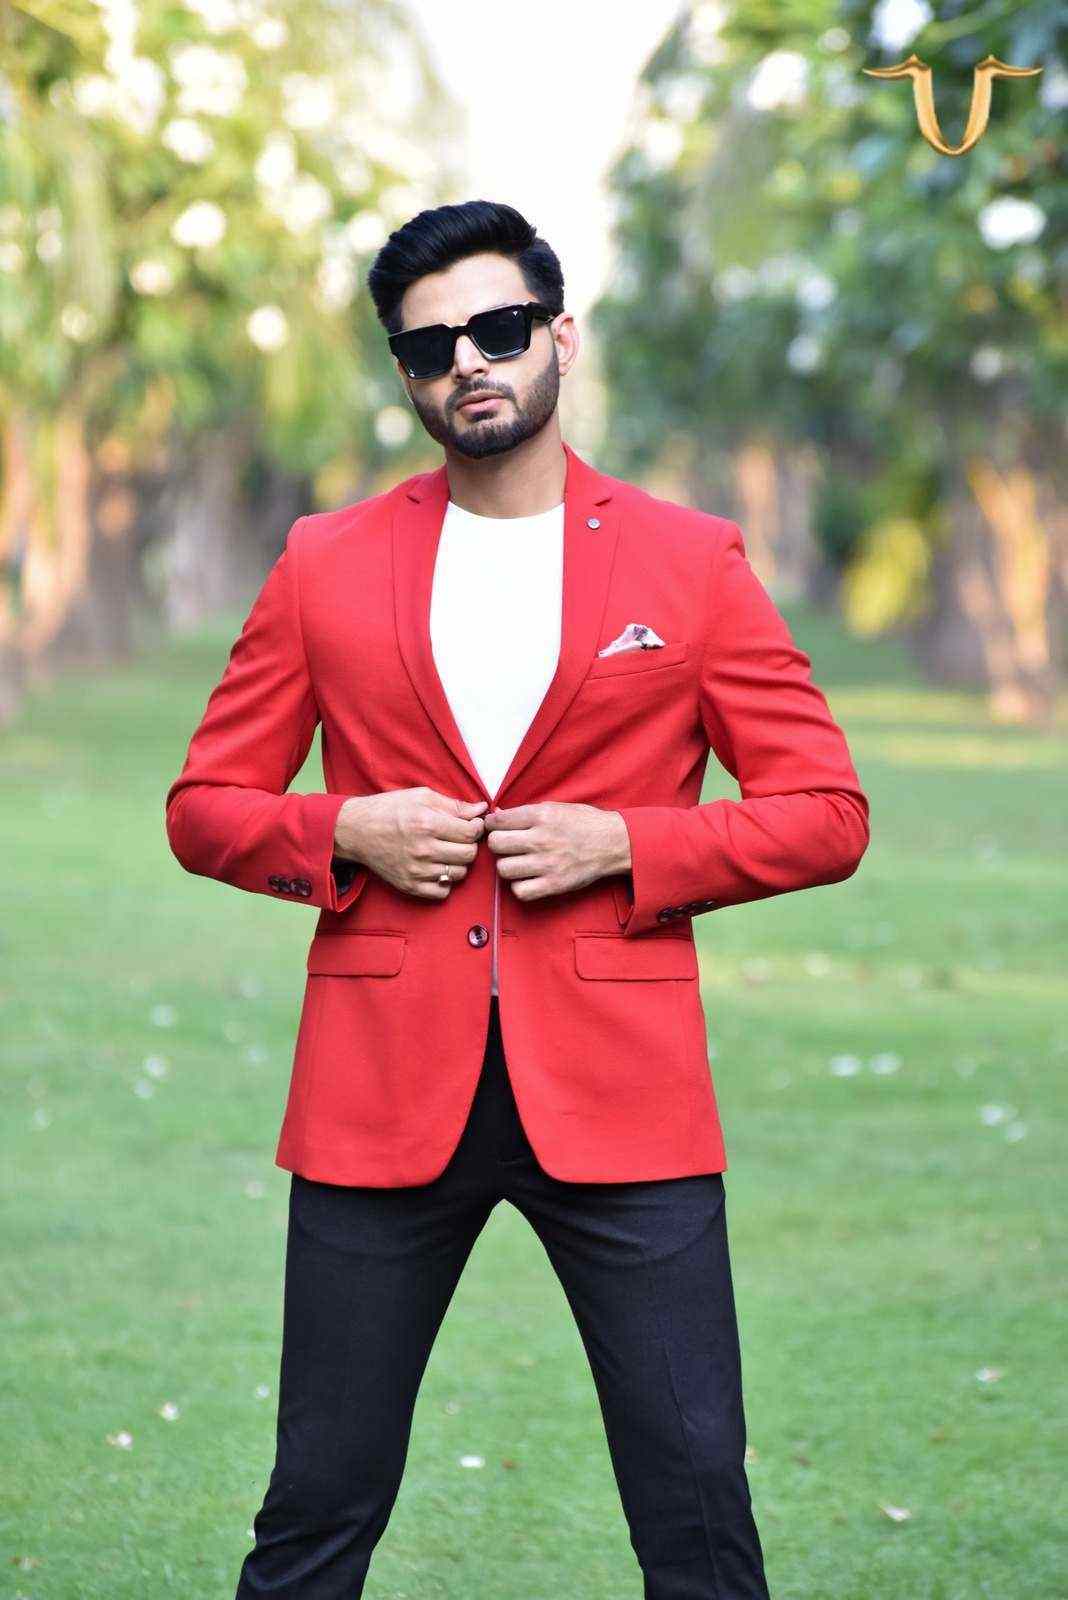 A boldly patterned red blazer made from a comfortable, machine-knitted fabric. The blazer has a contemporary design and features a unique, eye-catching print.